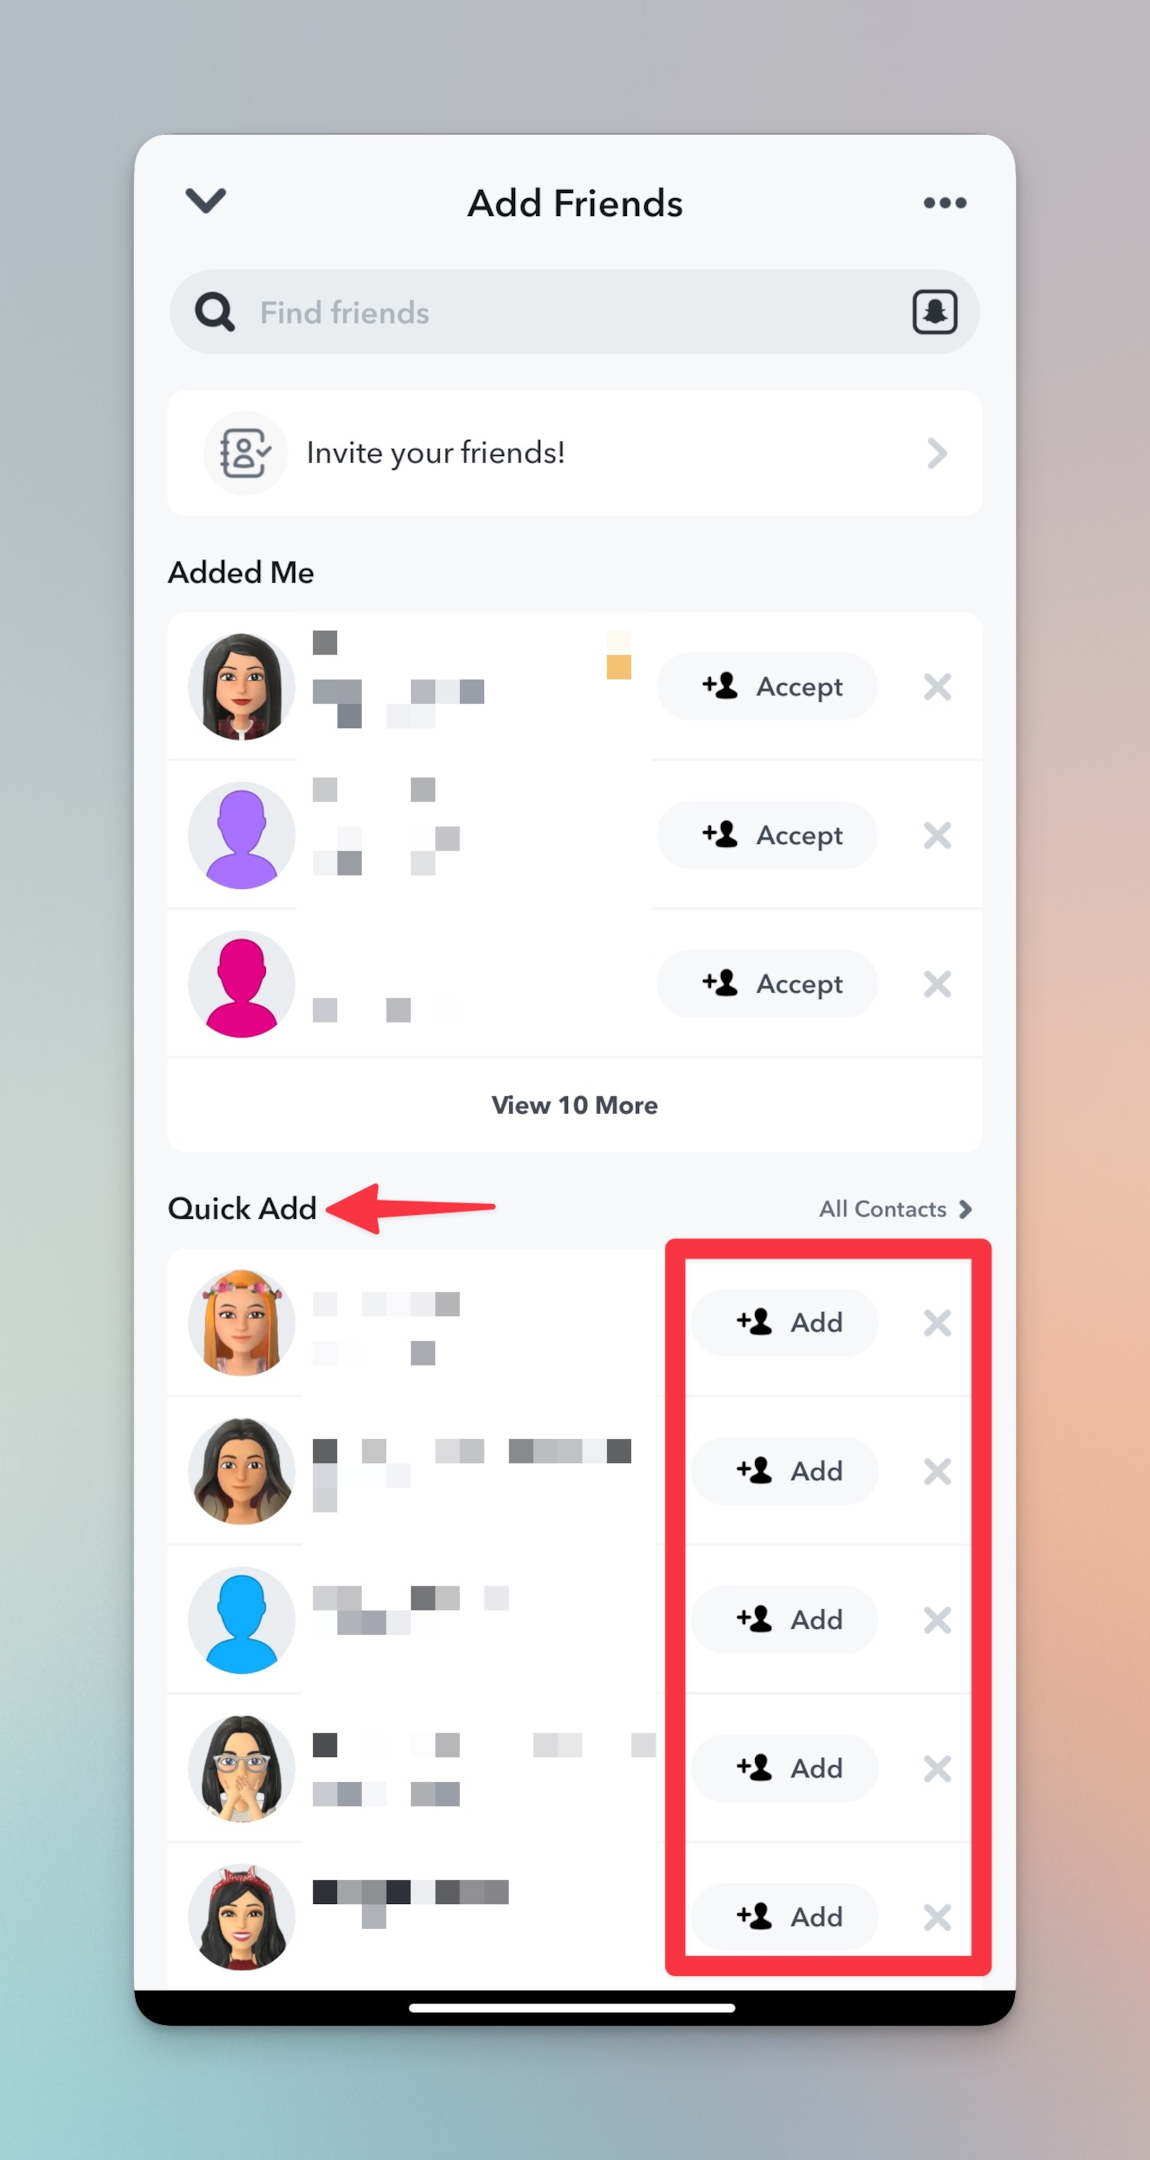 Remote.tools highlighting add button next to snapchat profile under Quick Add section to add them as friends